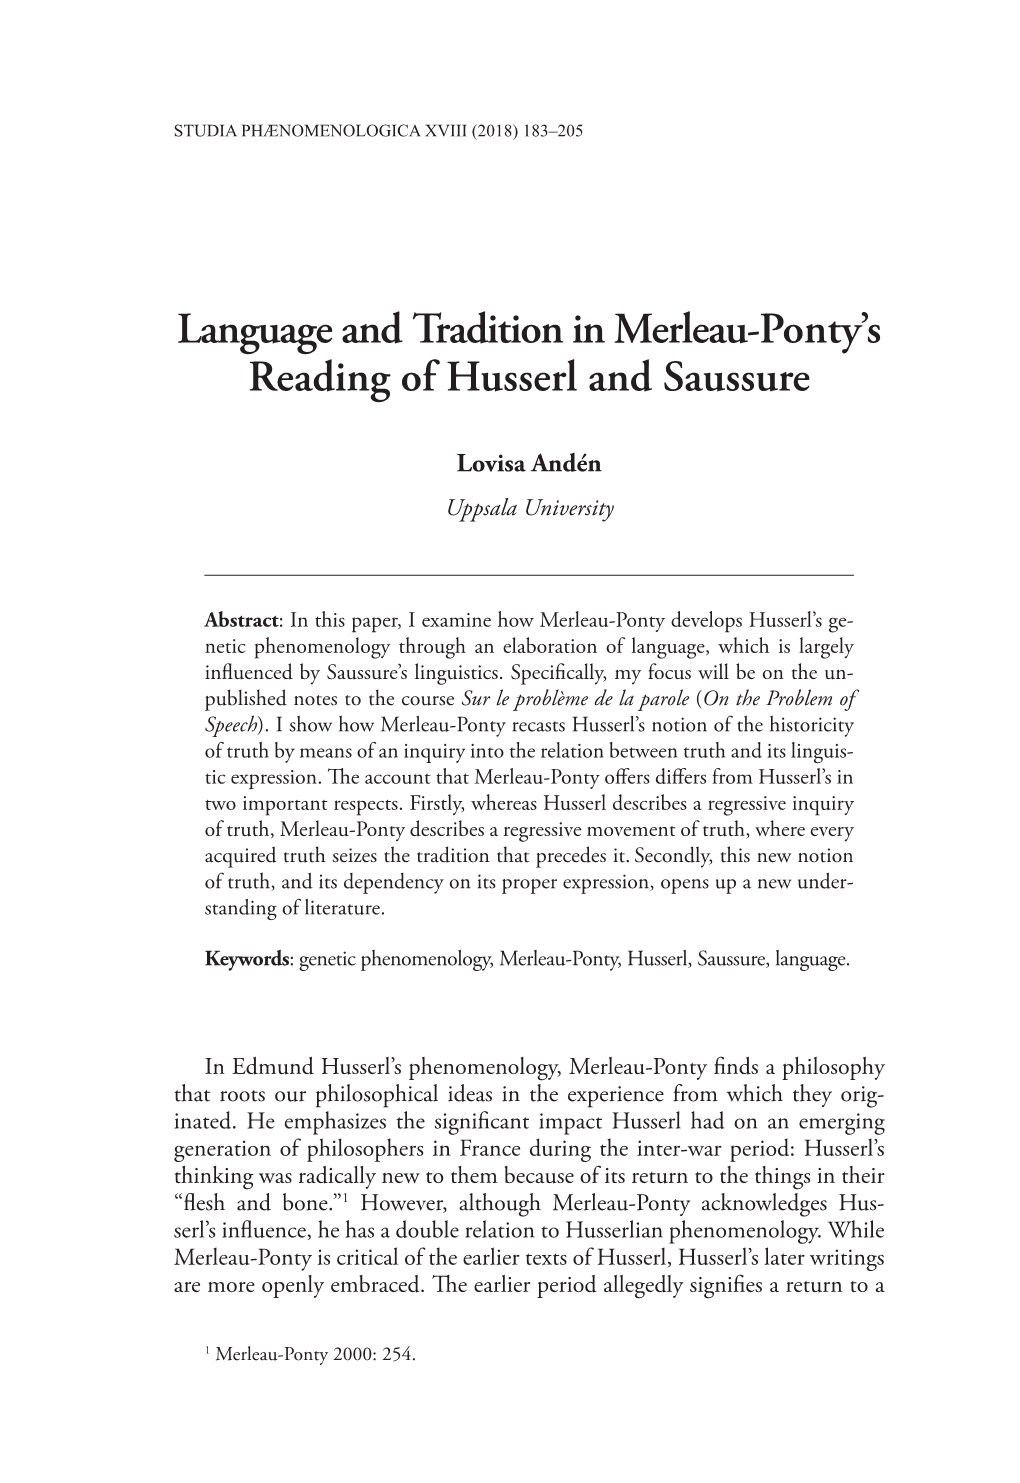 Language and Tradition in Merleau-Ponty's Reading Of